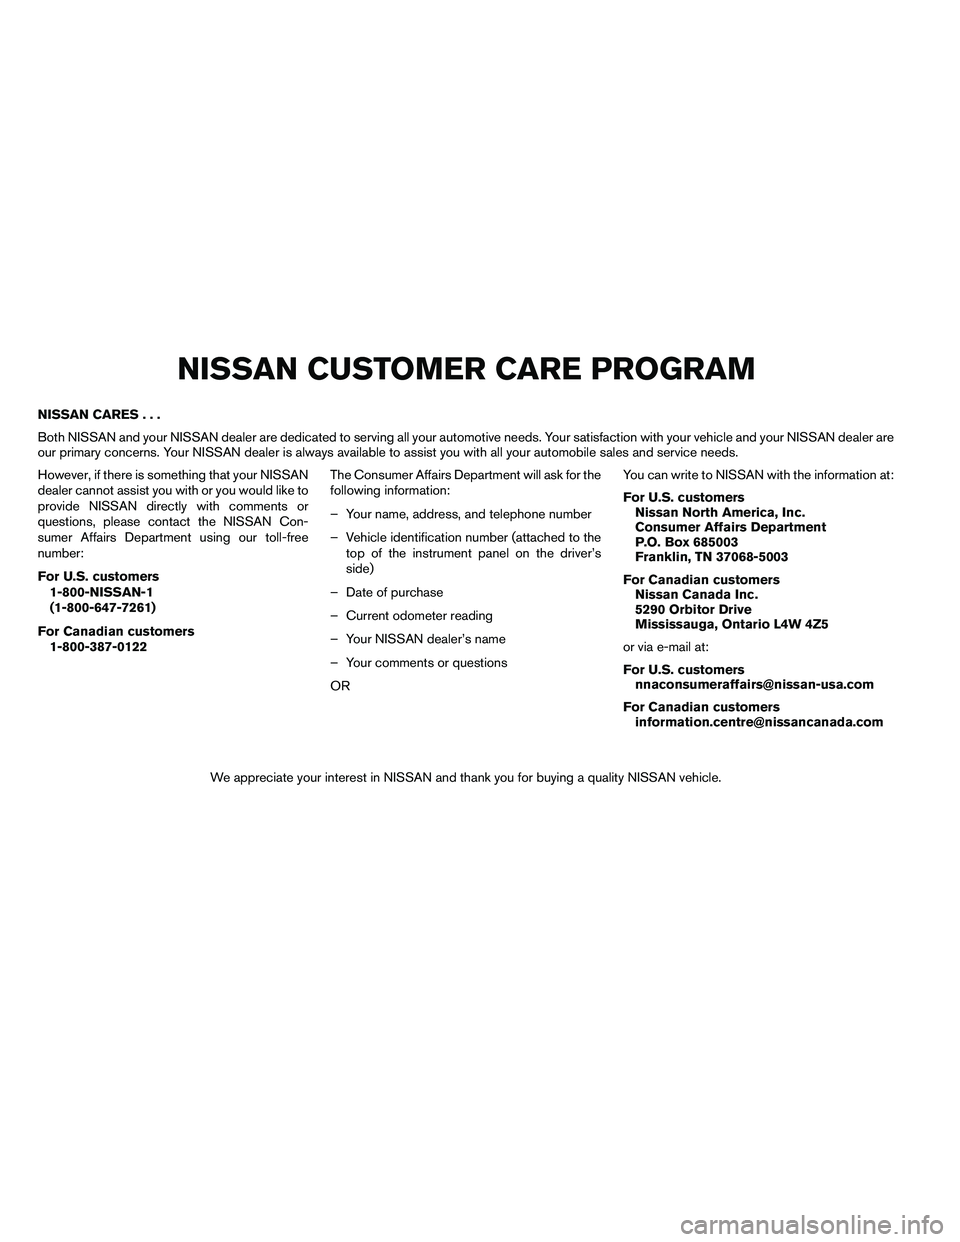 NISSAN ARMADA 2011  Owners Manual NISSAN CARES...
Both NISSAN and your NISSAN dealer are dedicated to serving all your automotive needs. Your satisfaction with your vehicle and your NISSAN dealer are
our primary concerns. Your NISSAN 